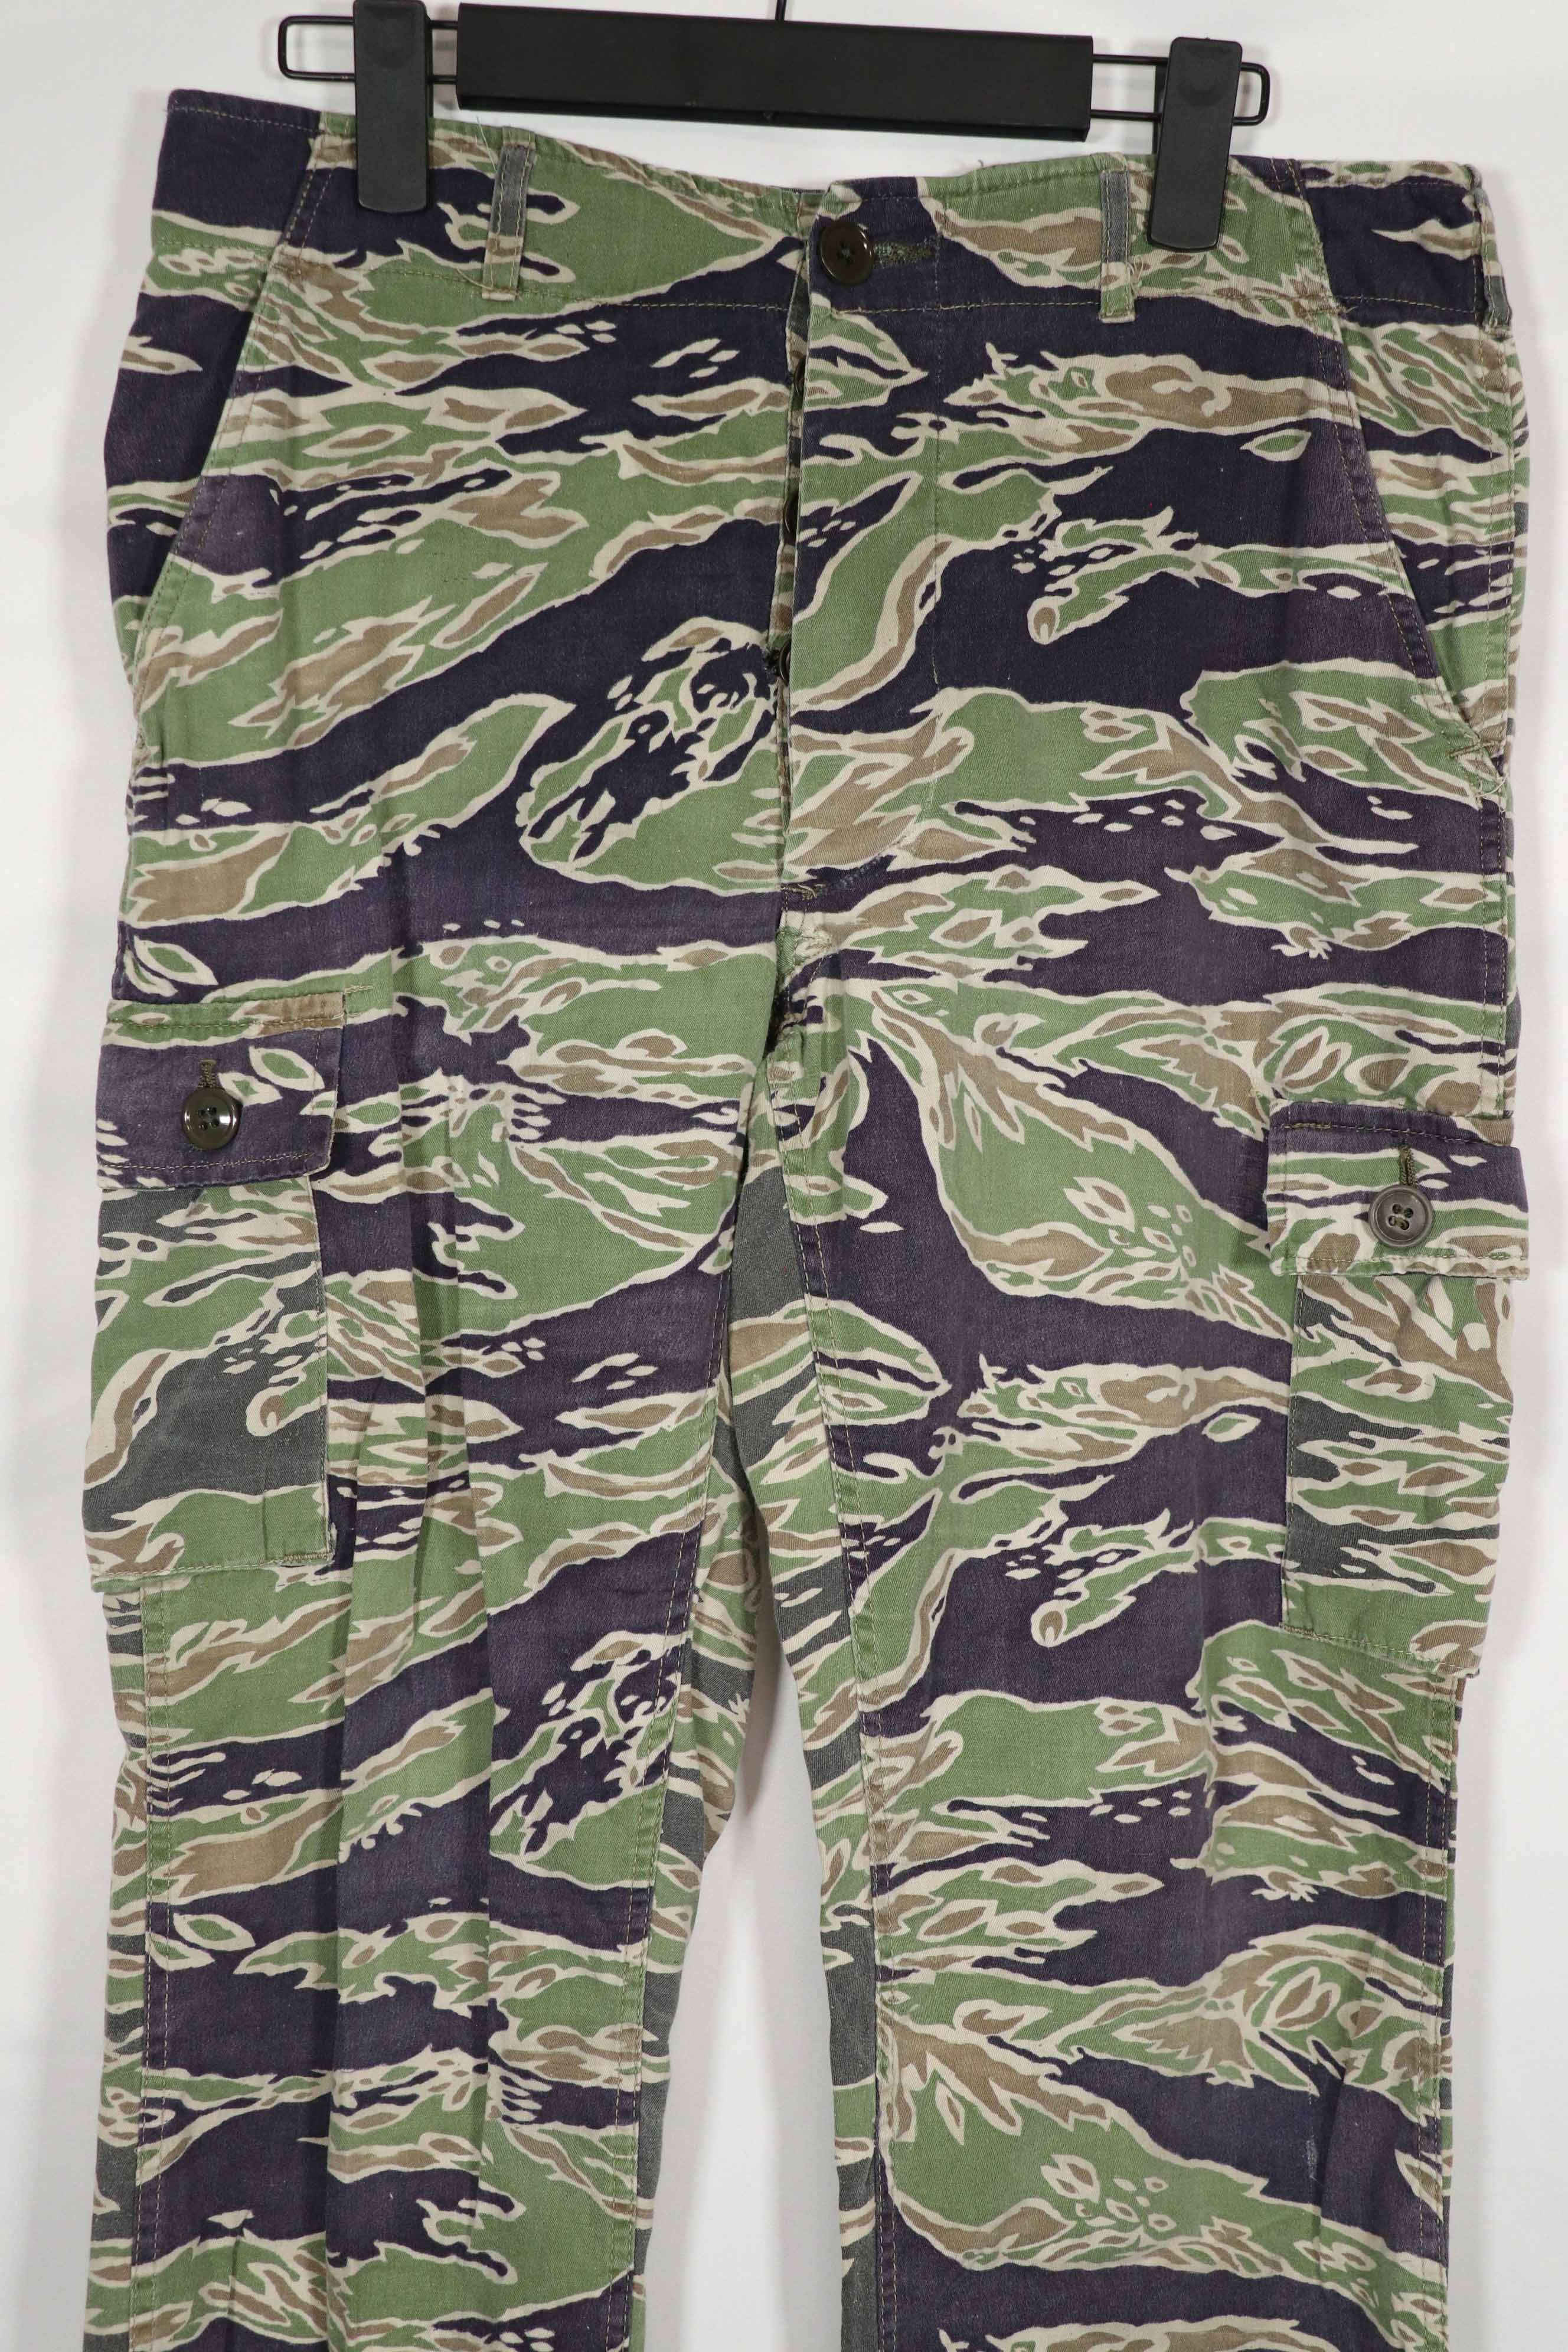 Real Late War lightweight tiger stripe pants, faded, used.